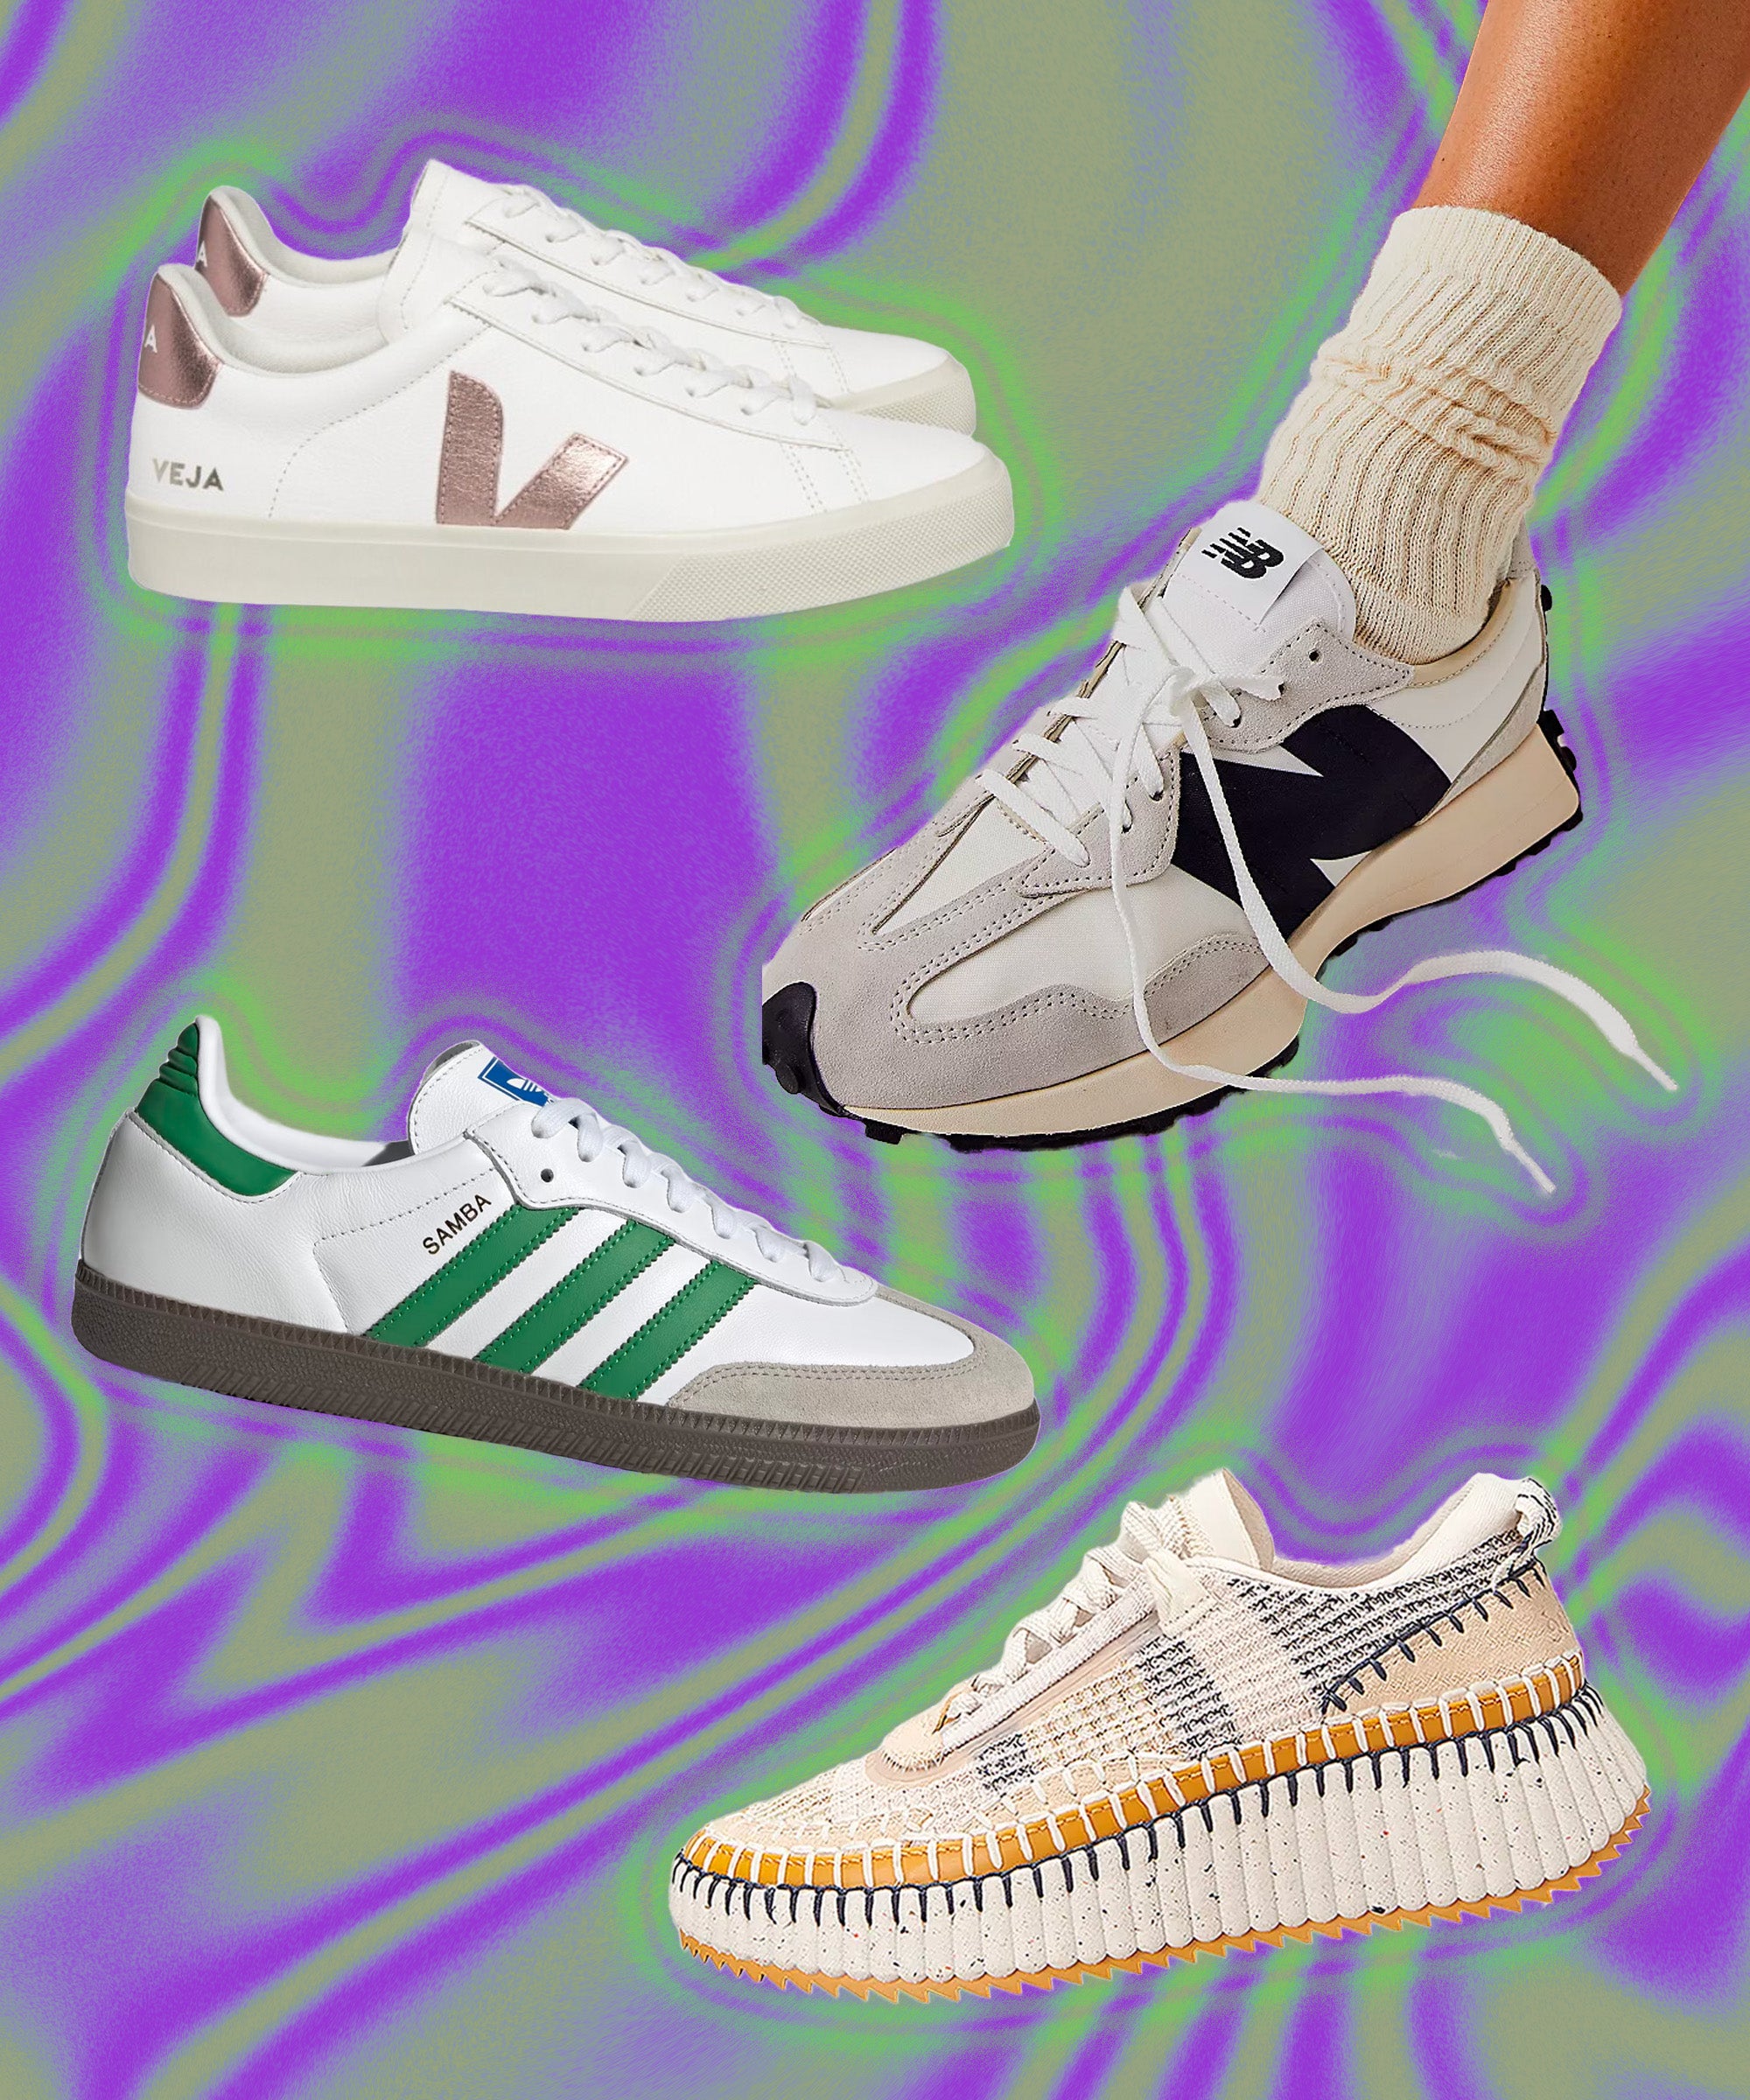 How to Style Sneakers for Fall - Color & Chic